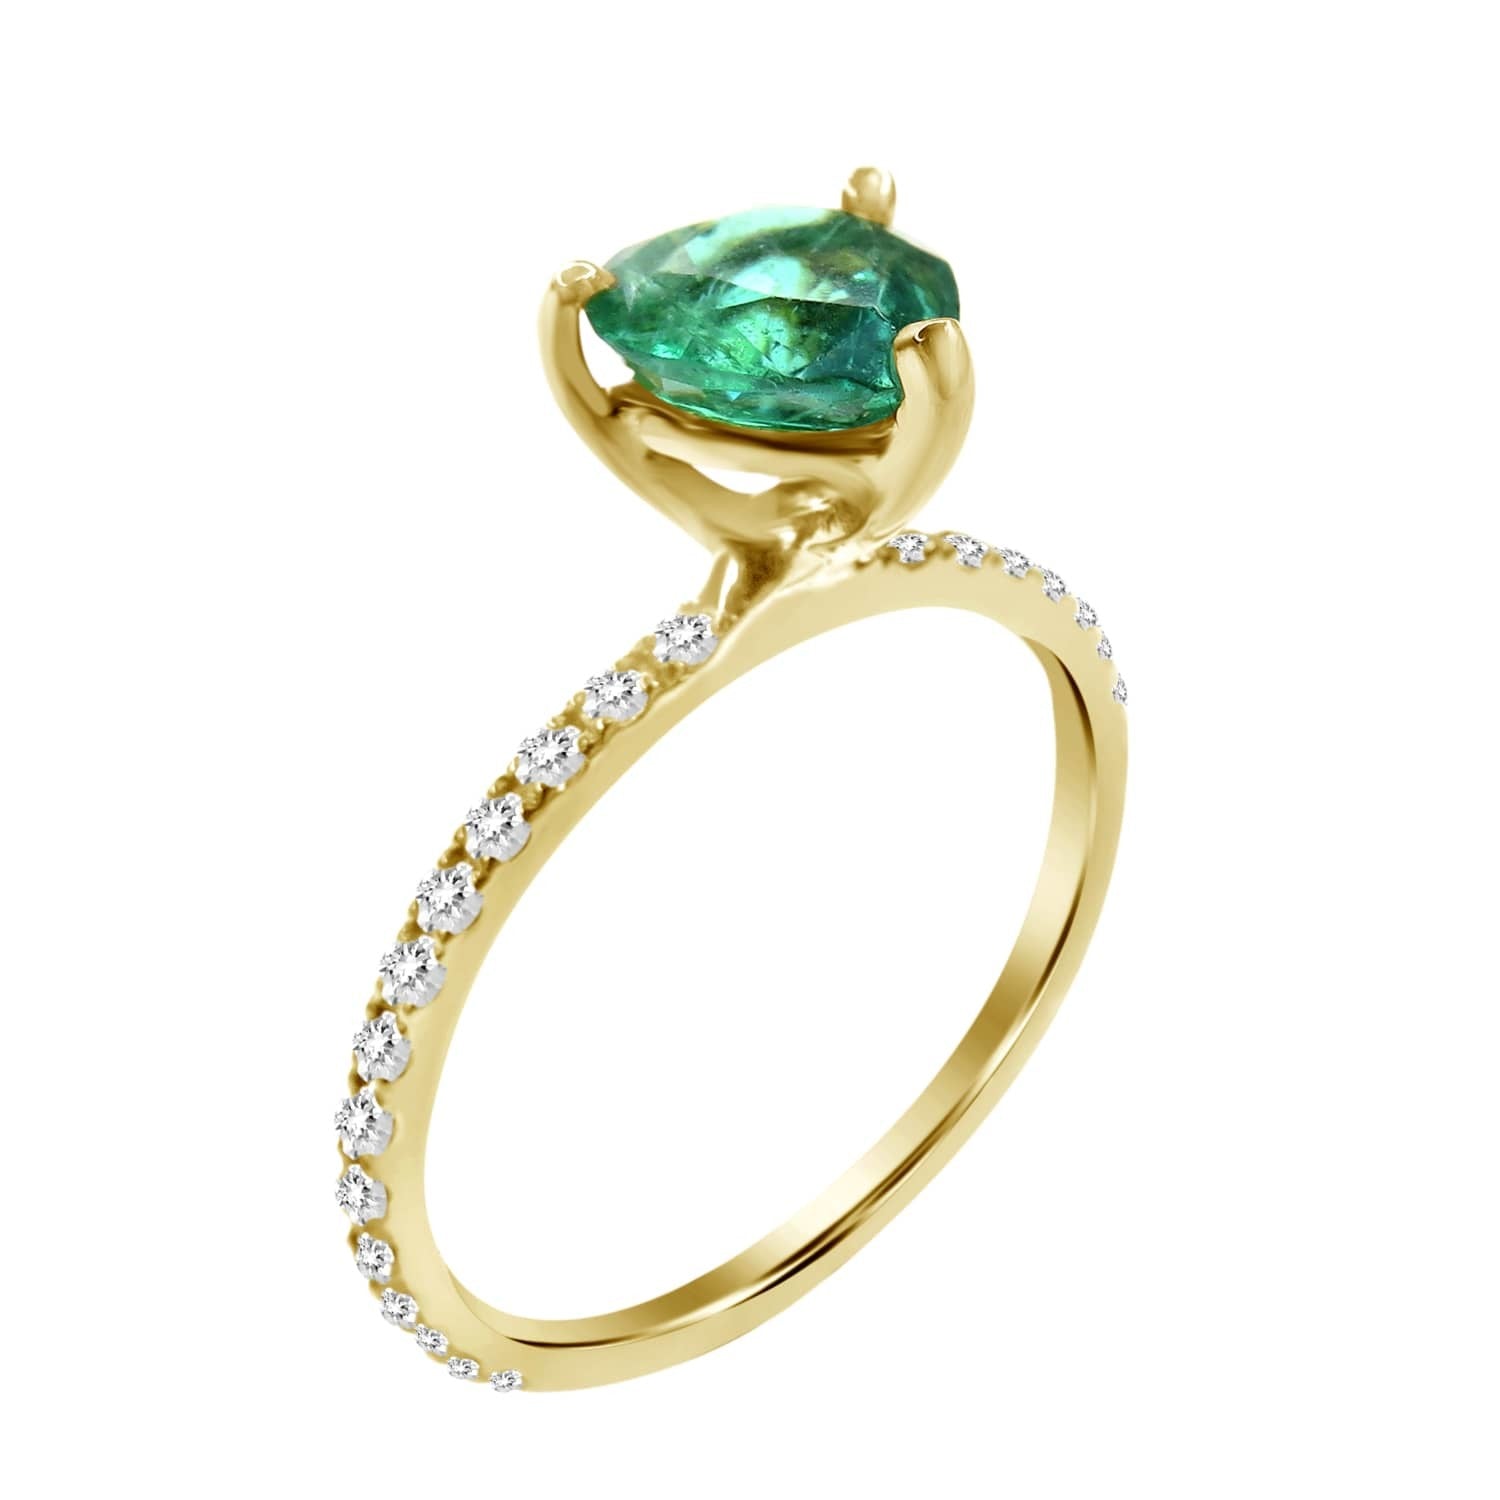 18k Gold Green Emerald Heart and Diamond Ring